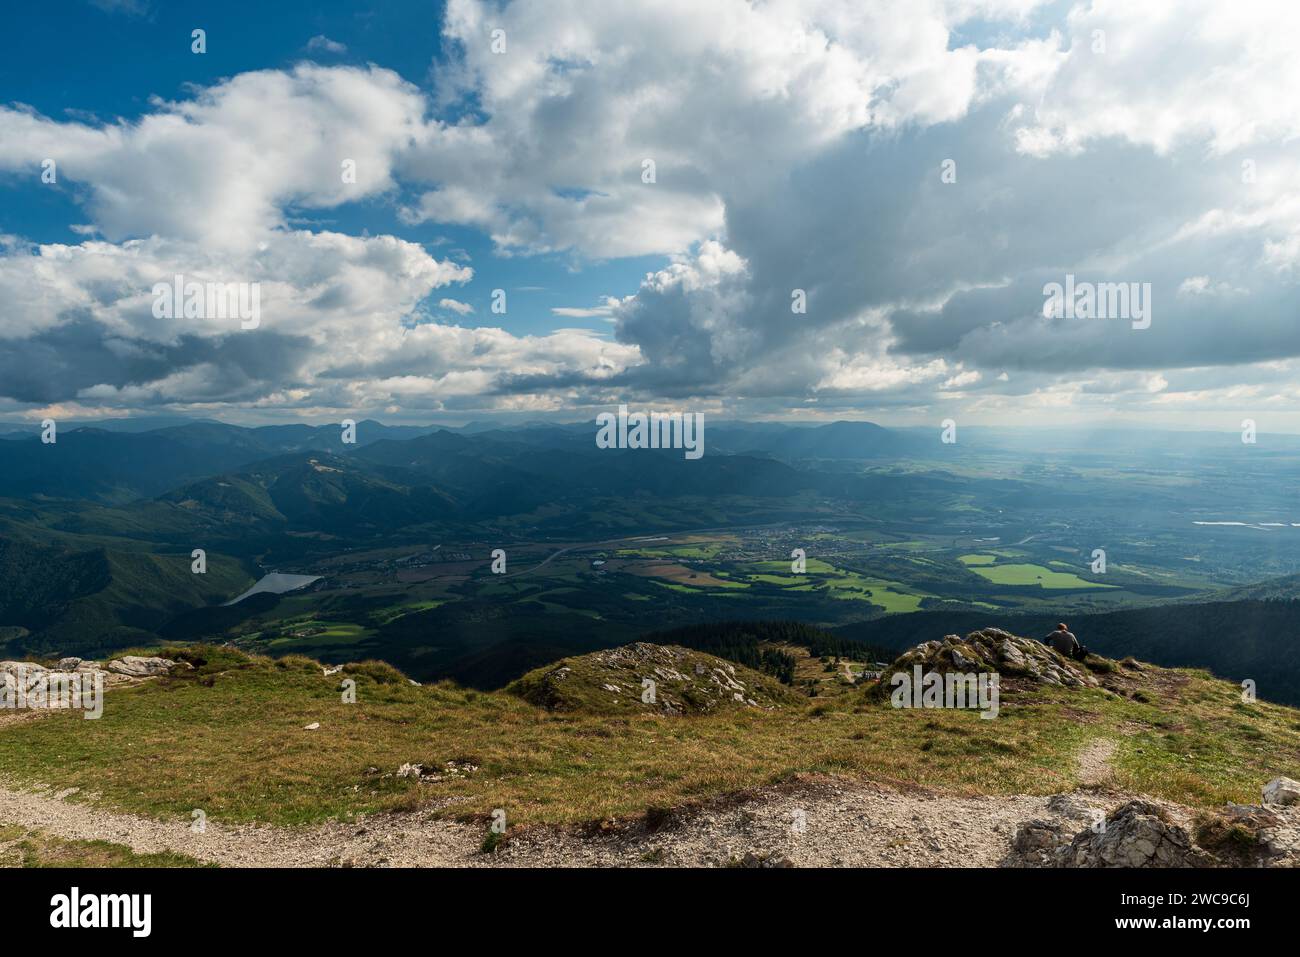 View from Chleb hill in Mala Fatra mountains in Slovakia during late summer Stock Photo